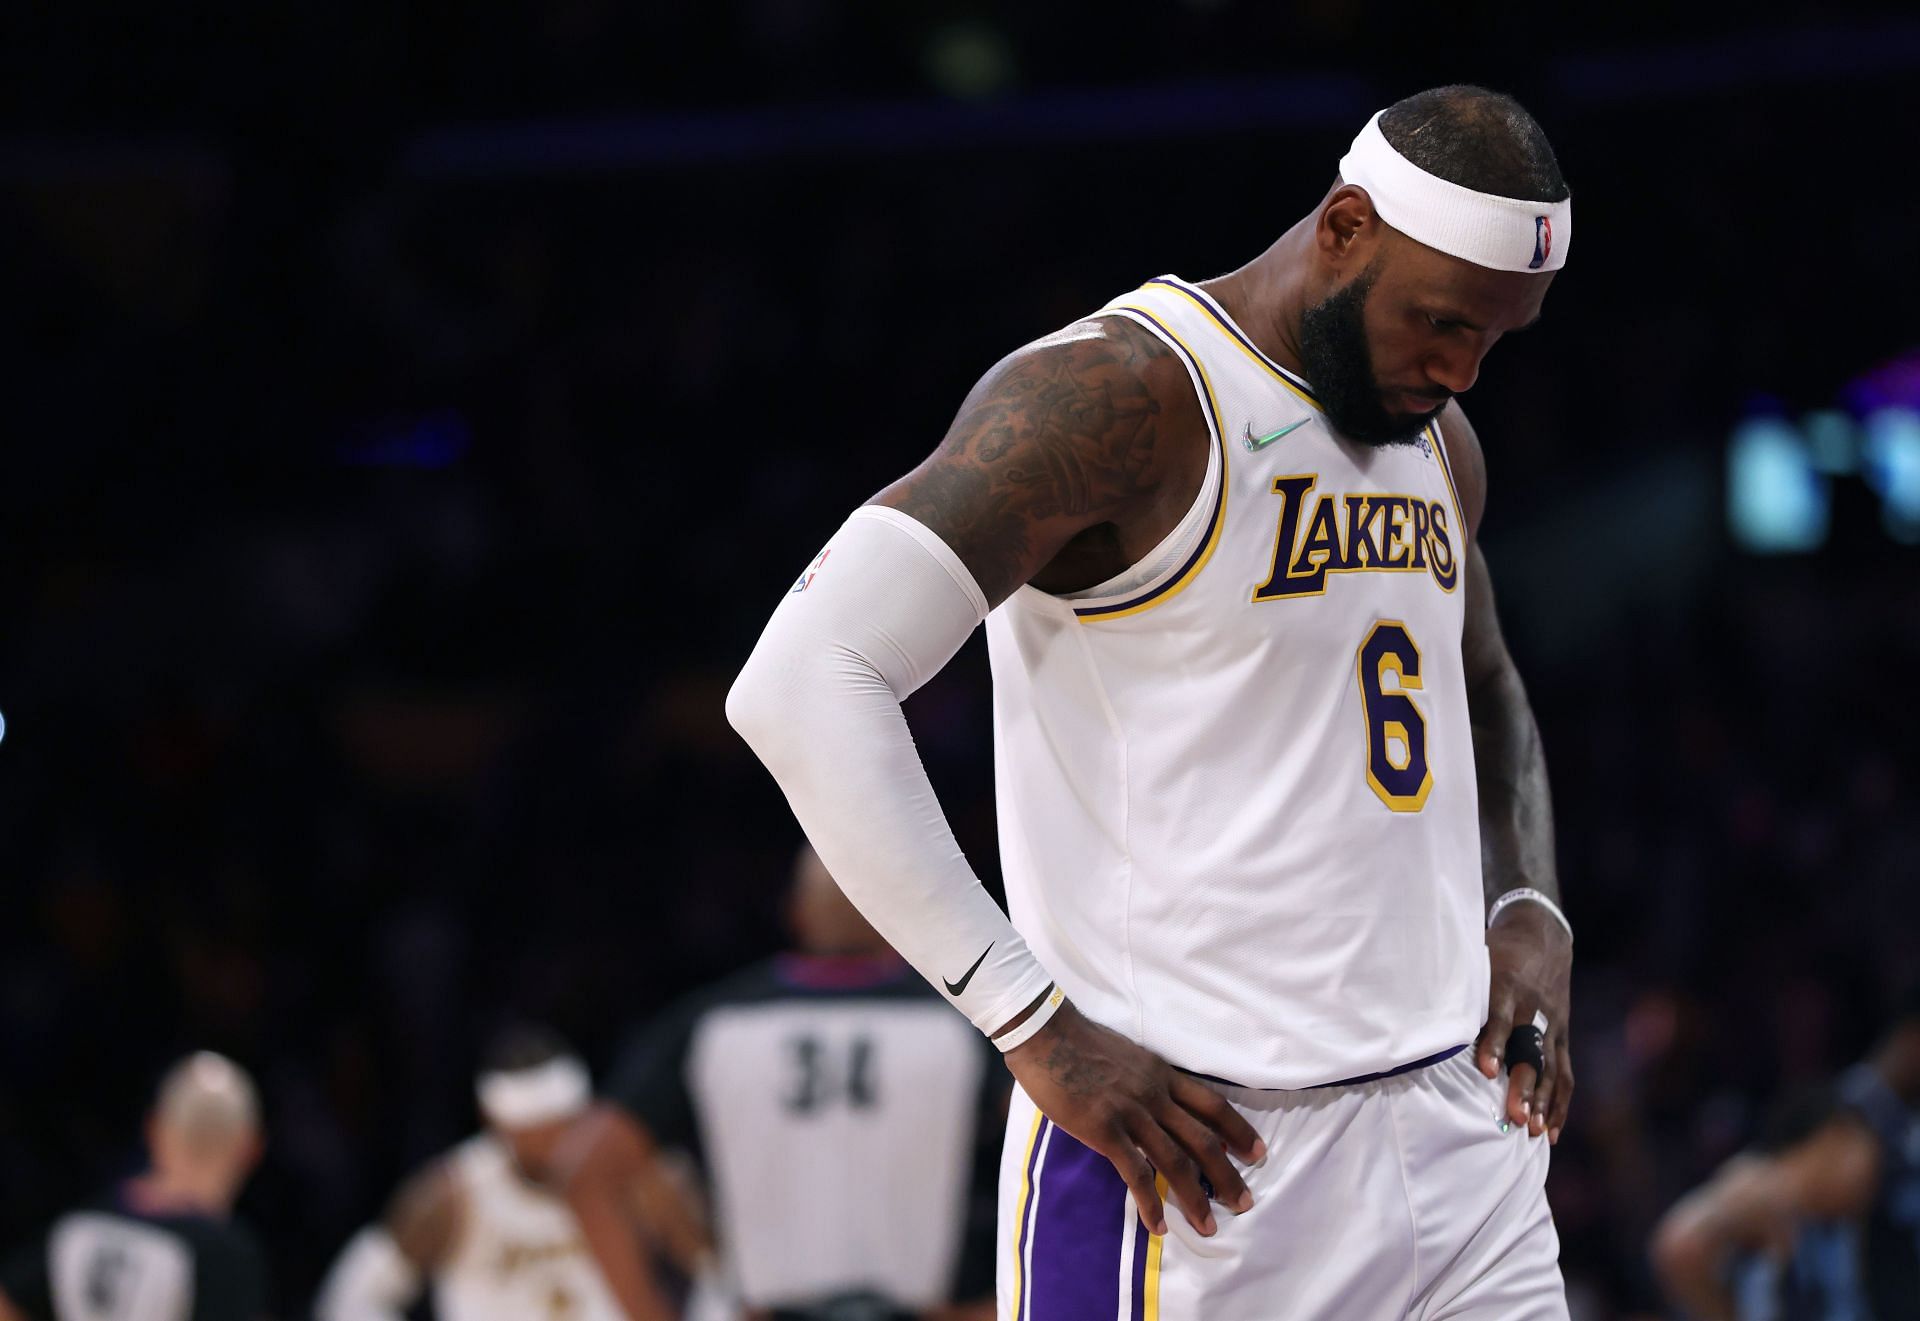 LA Lakers superstar LeBron James would be raring to go.